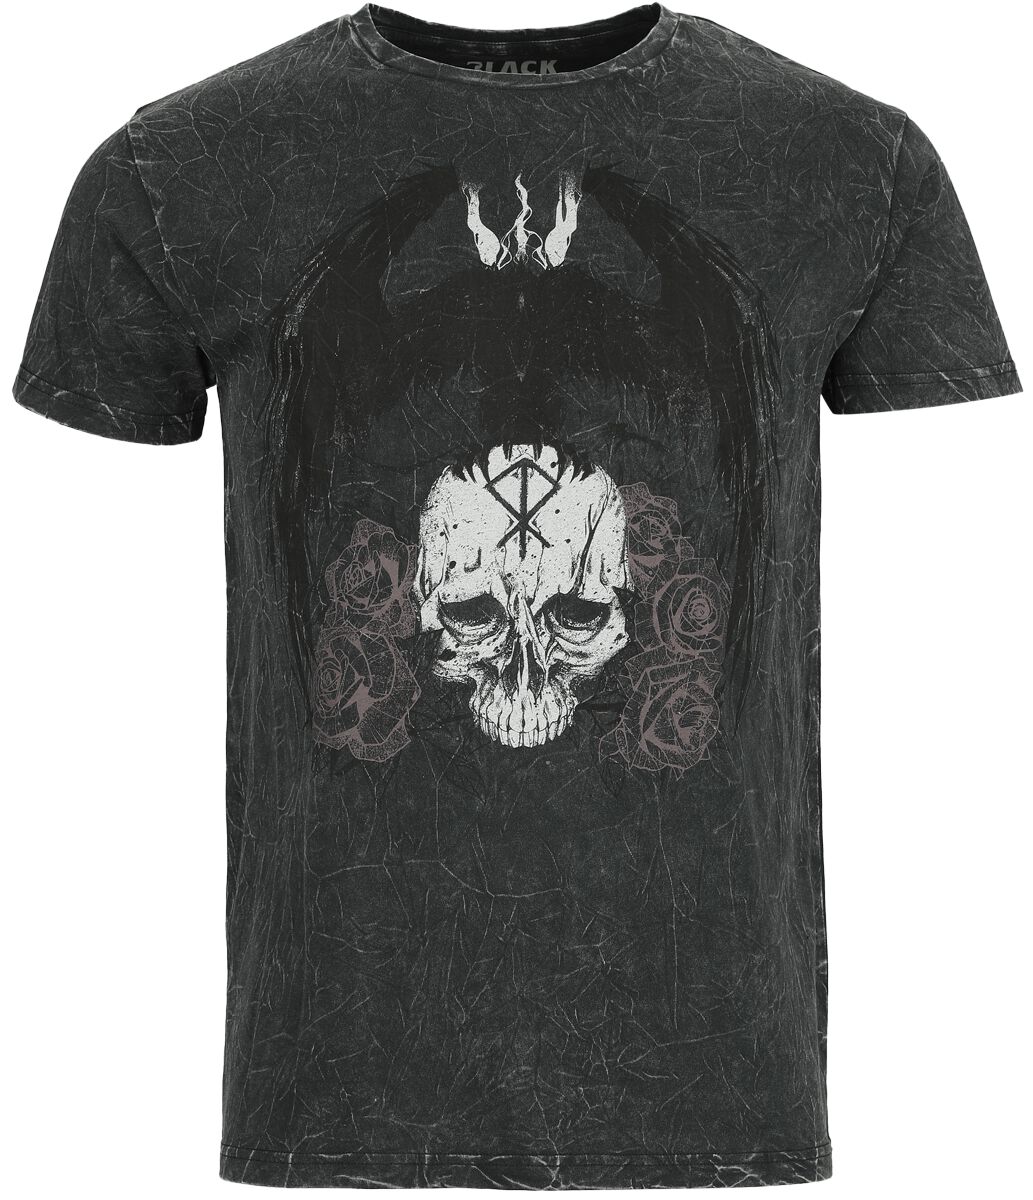 Image of T-Shirt di Black Premium by EMP - Black washed t-shirt with skull and crown print - L a XL - Uomo - grigio